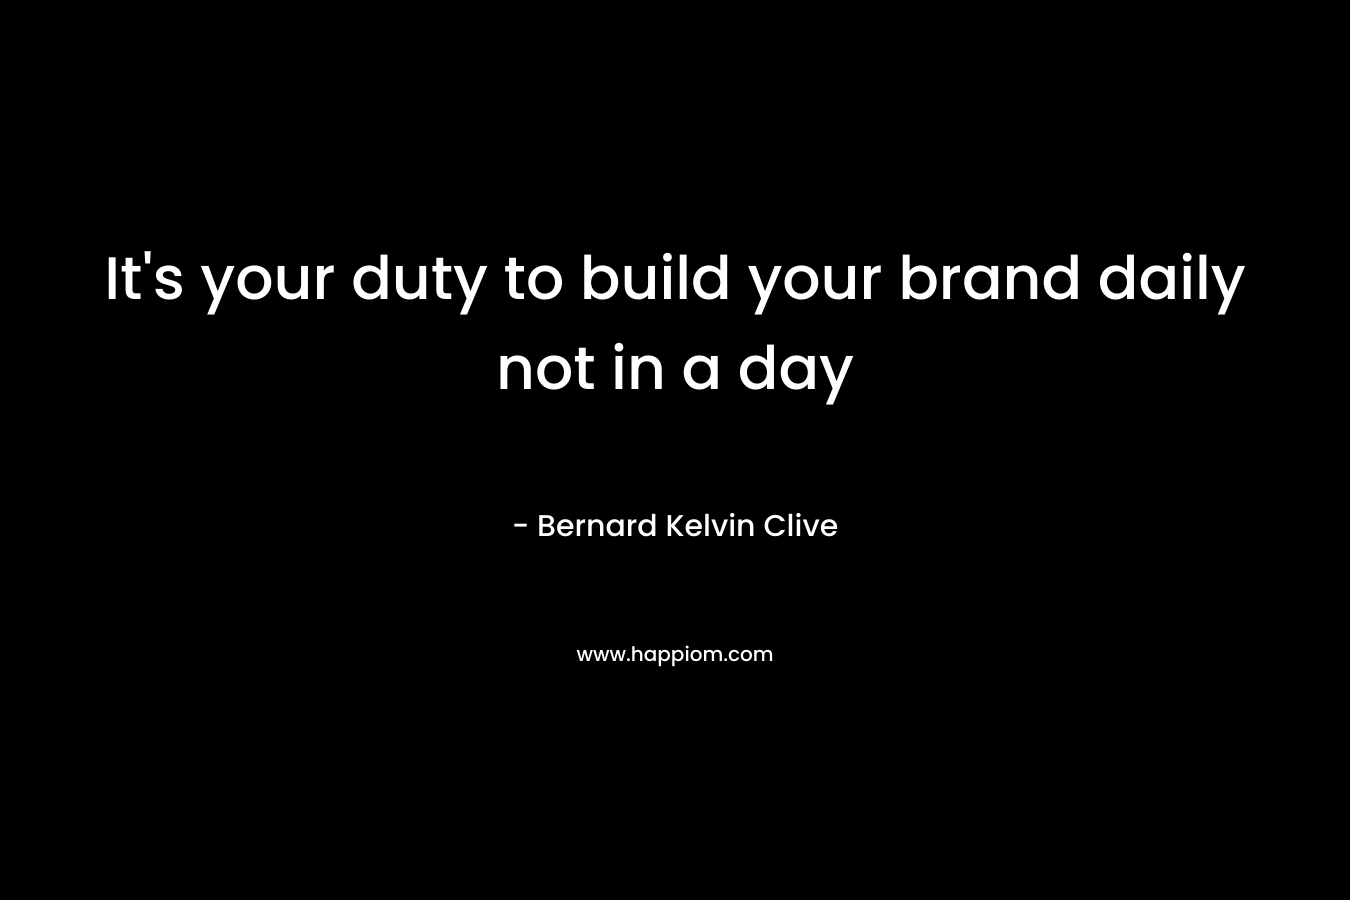 It’s your duty to build your brand daily not in a day – Bernard Kelvin Clive